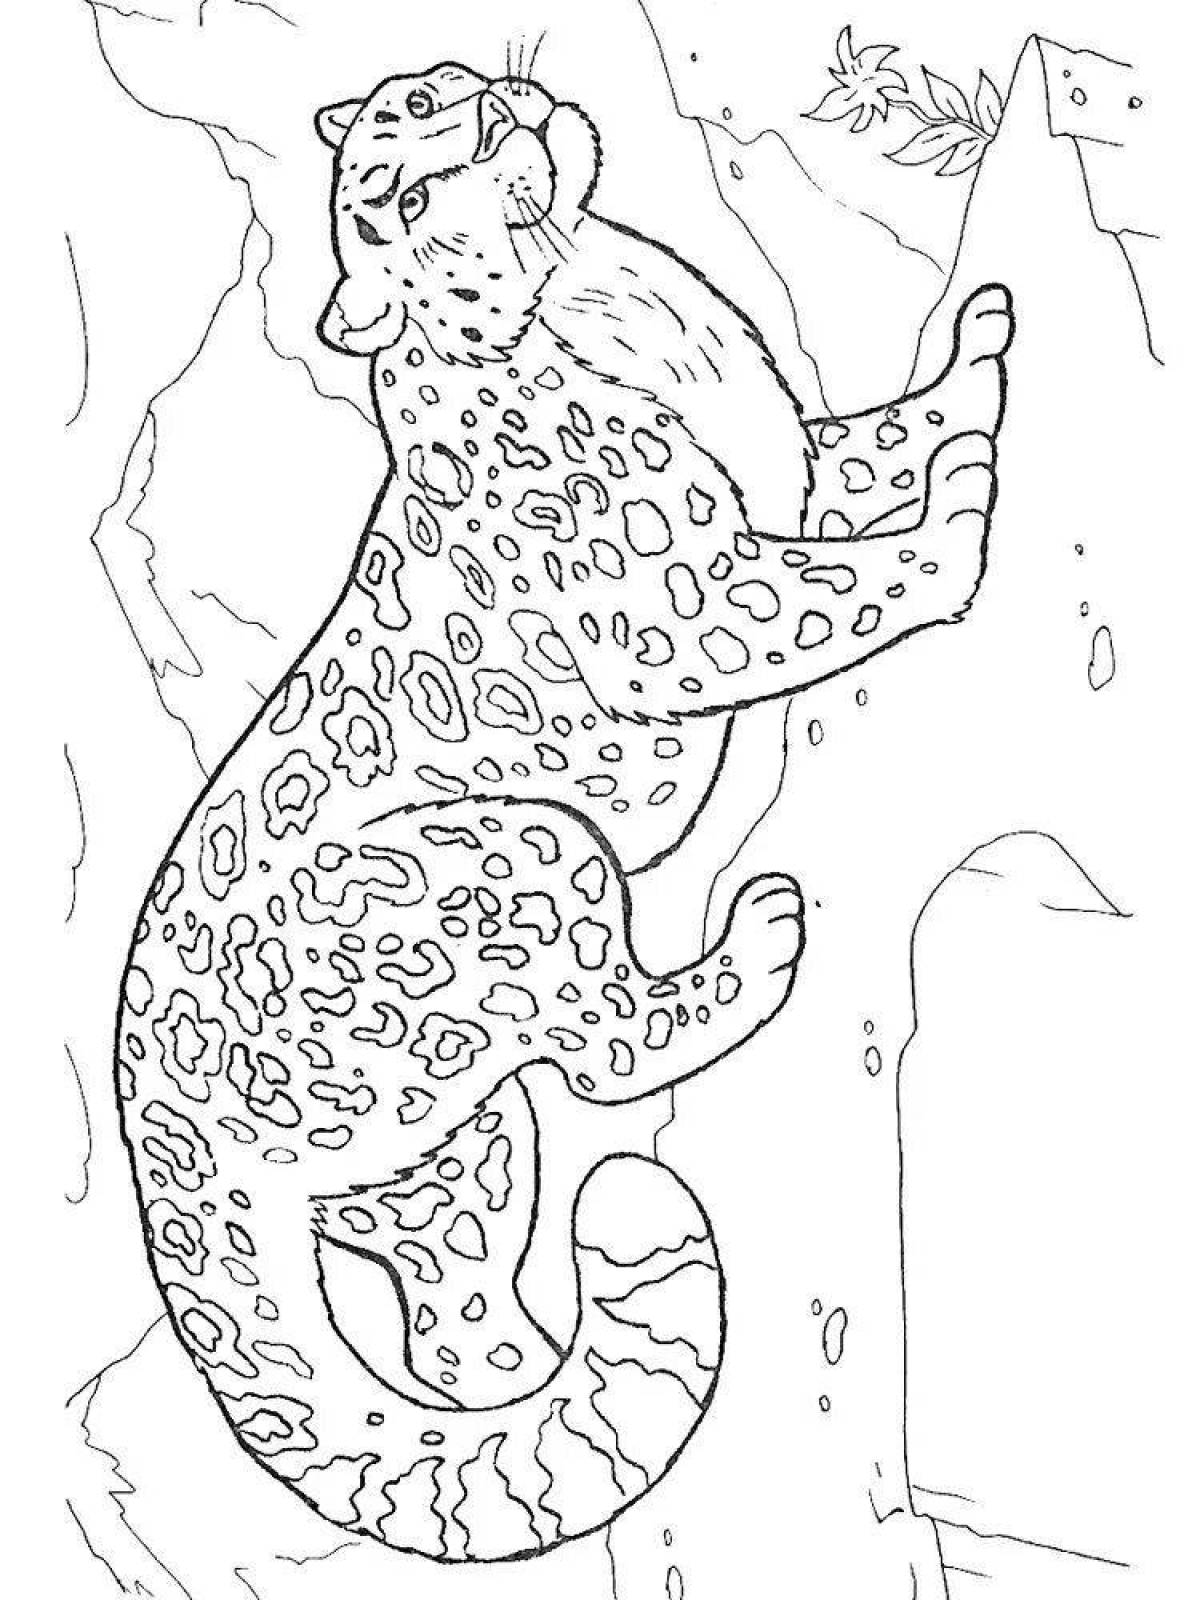 Majestic snow leopard coloring page